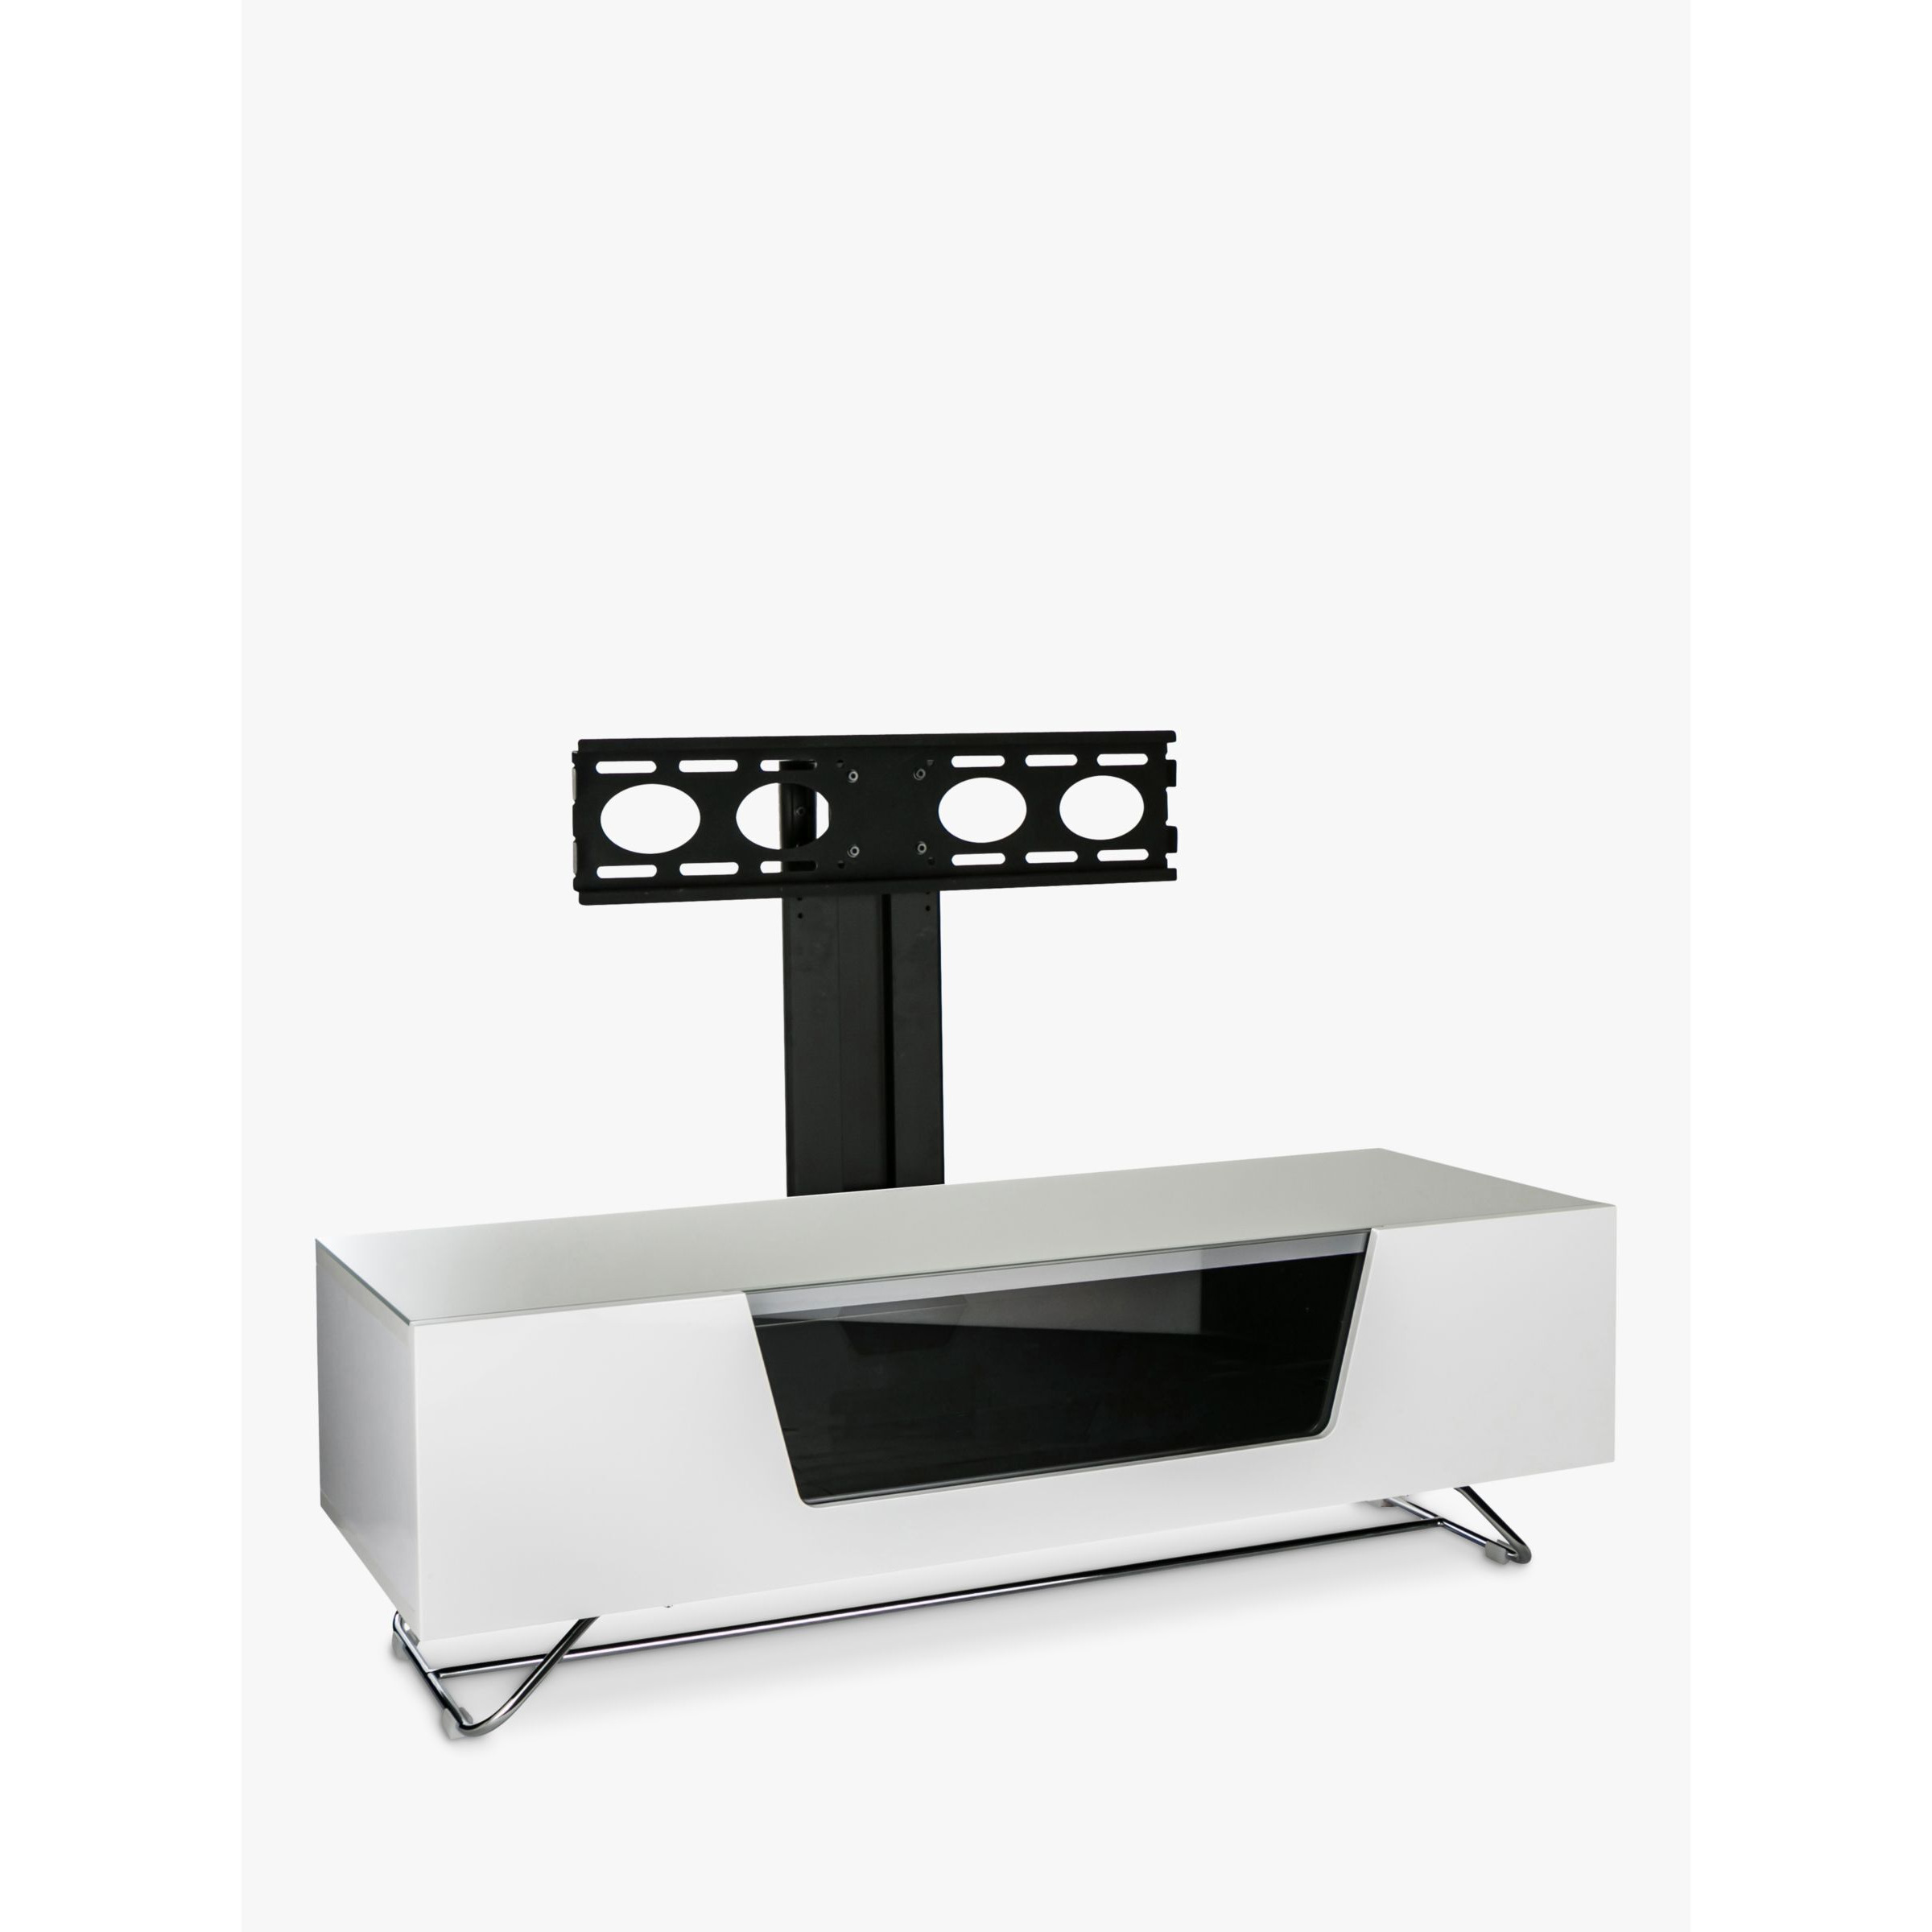 "Alphason Chromium 2 1200mm TV Stand with Bracket for TVs up to 50""" - image 1